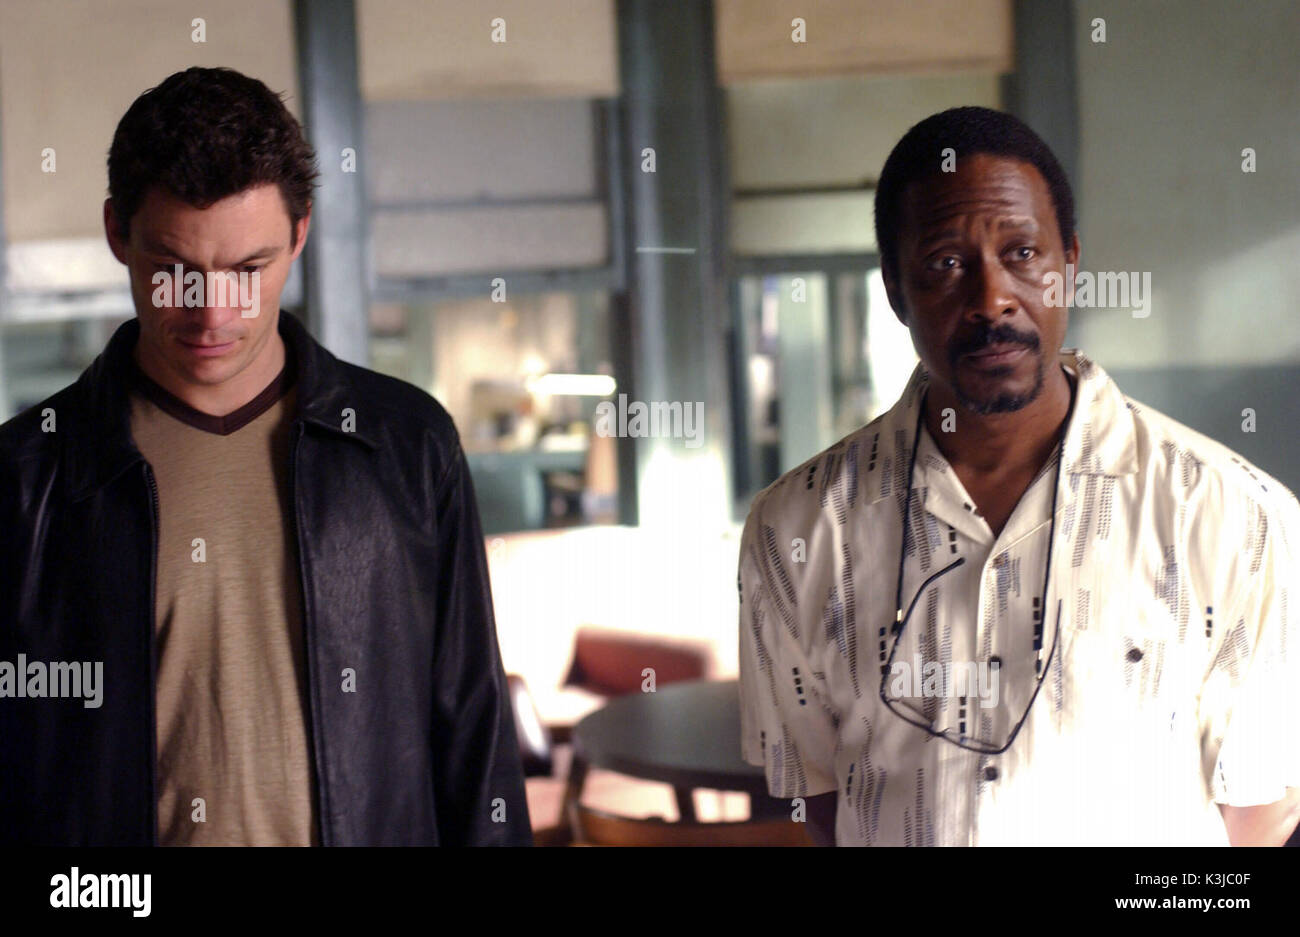 THE WIRE [US TV SERIES 2002 - ] Series#2, Episode#9/Stray Rounds DOMINIC  WEST as Det. James 'Jimmy' McNulty, CLARKE PETERS as Det. Lester Freamon  THE WIRE Stock Photo - Alamy